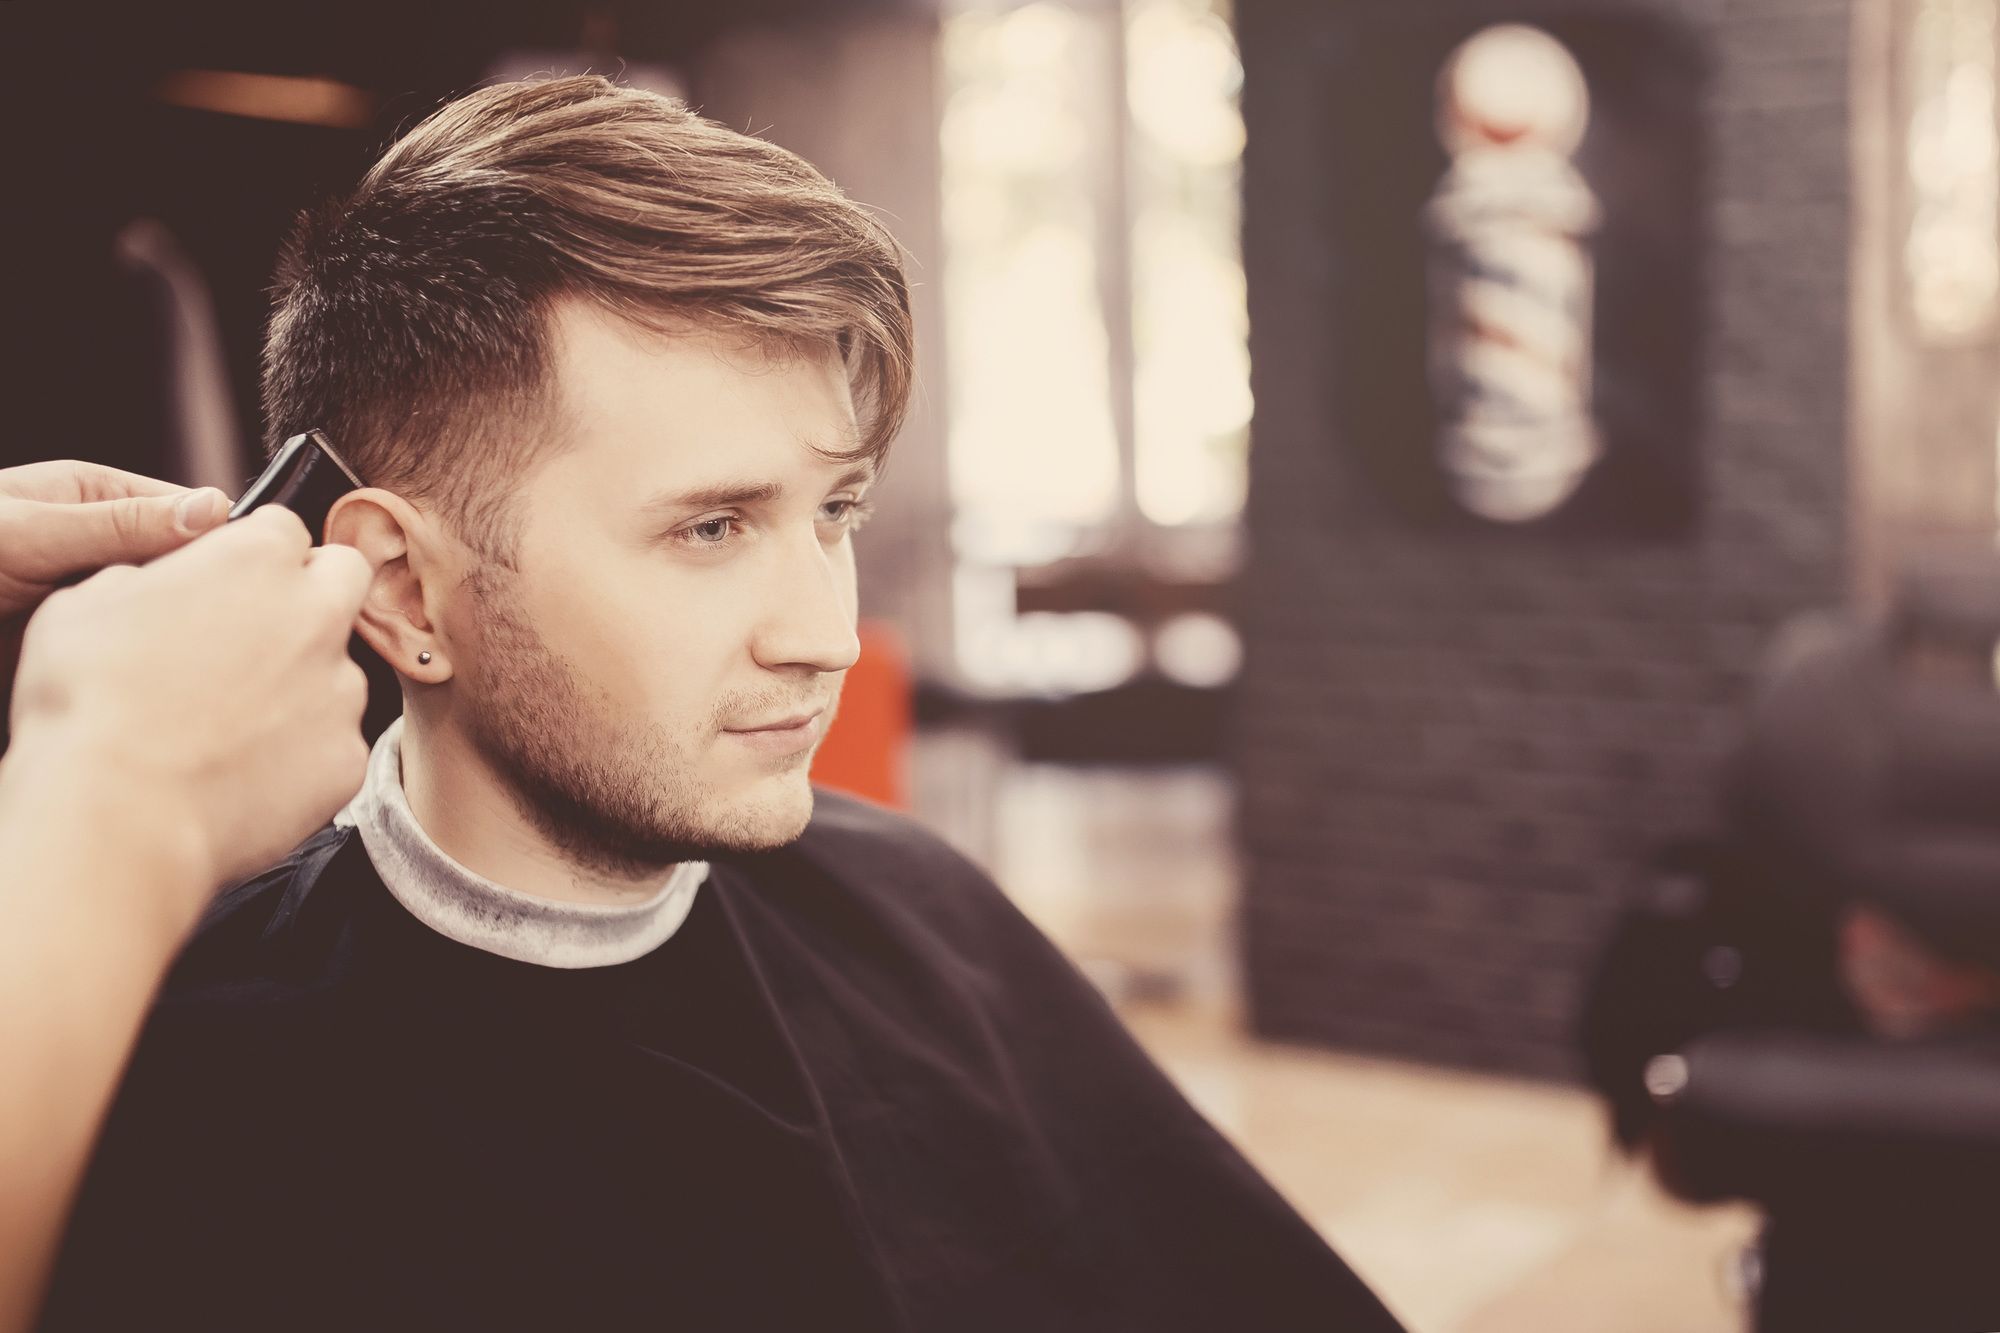 40 Crew Cut Examples: A Great Choice for Modern Men | Haircut Inspiration